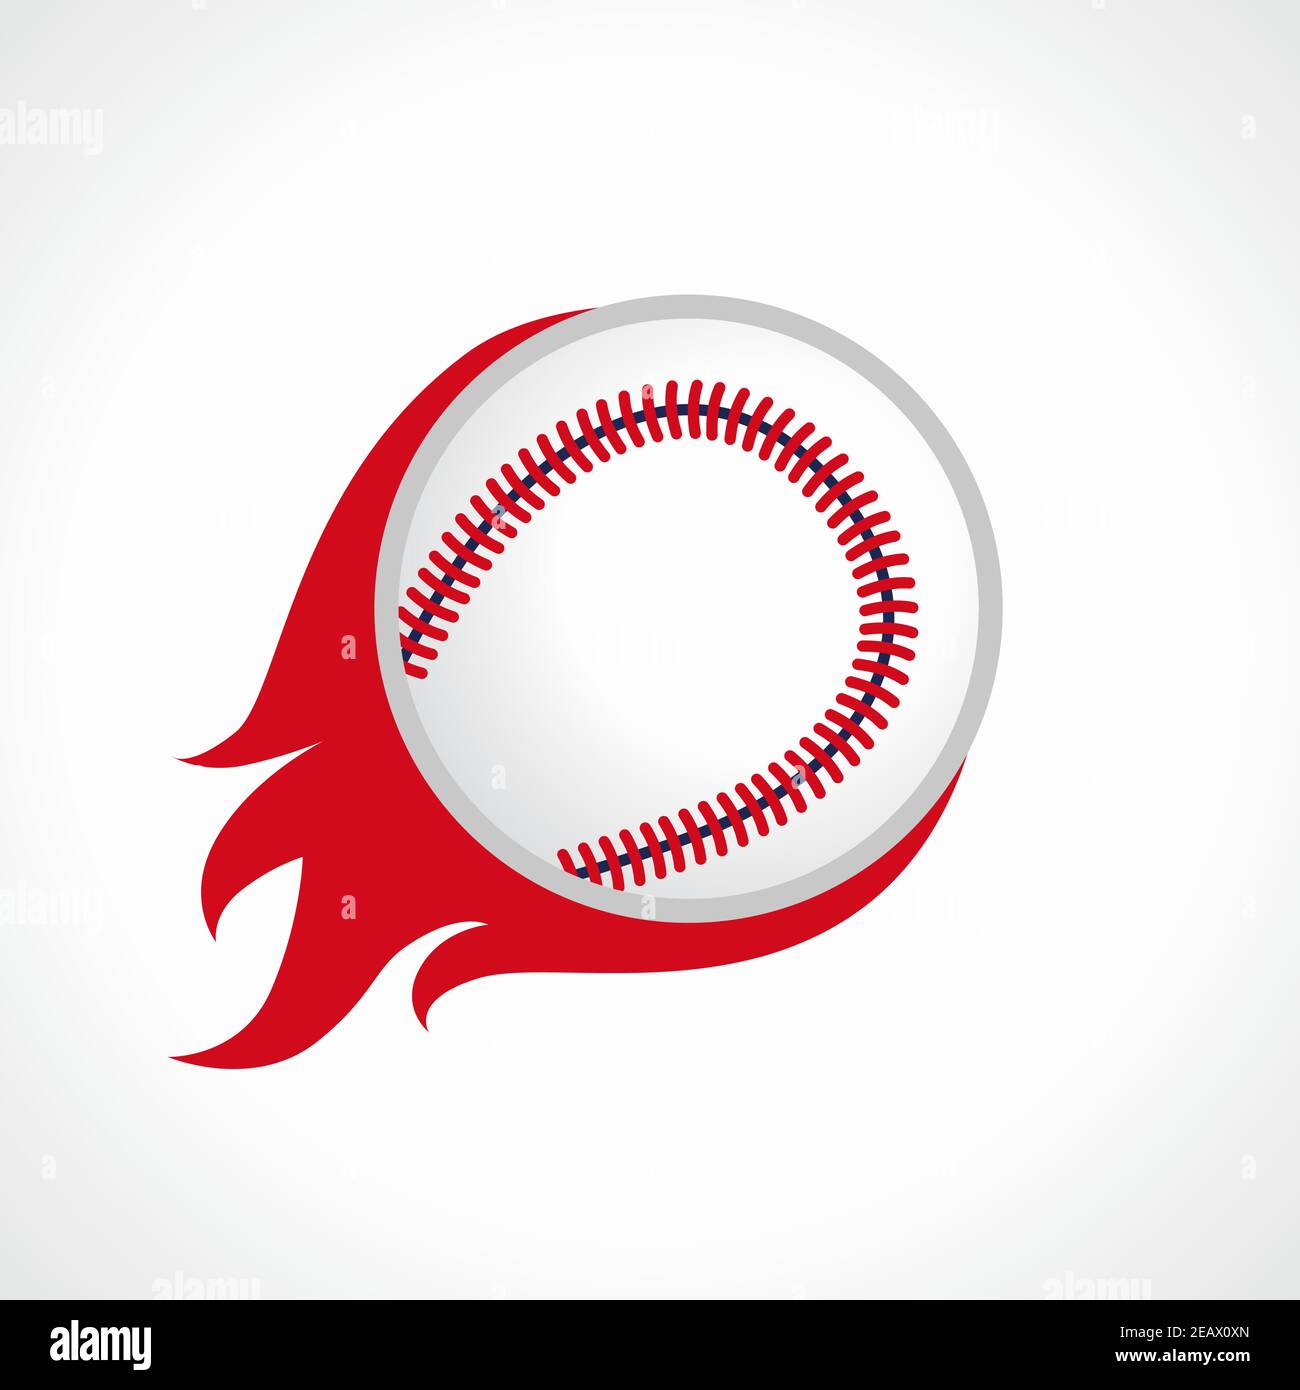 Flying and flaming baseball ball. Fiery sign, vector logo of teams, national competitions, union, matches, leagues or sport equipment shop. Children's Stock Vector